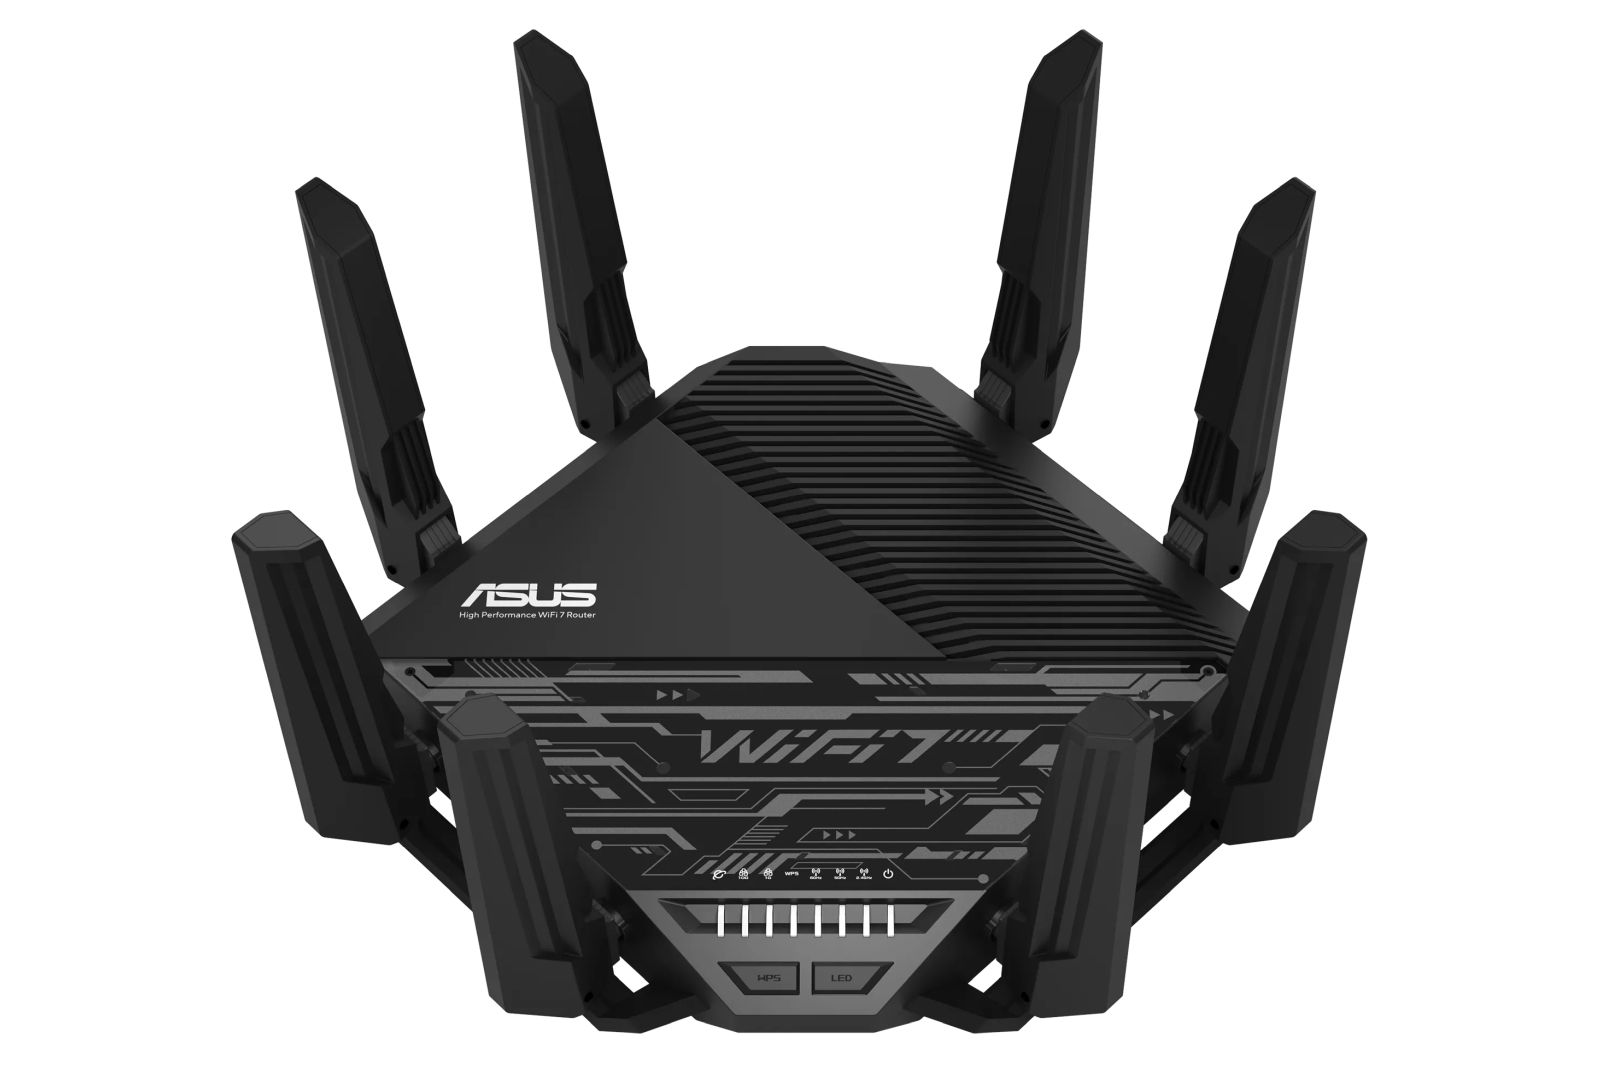 TP-Link Wi-Fi 7 Routers Are Coming in 2023, Before Wi-Fi 7 Even